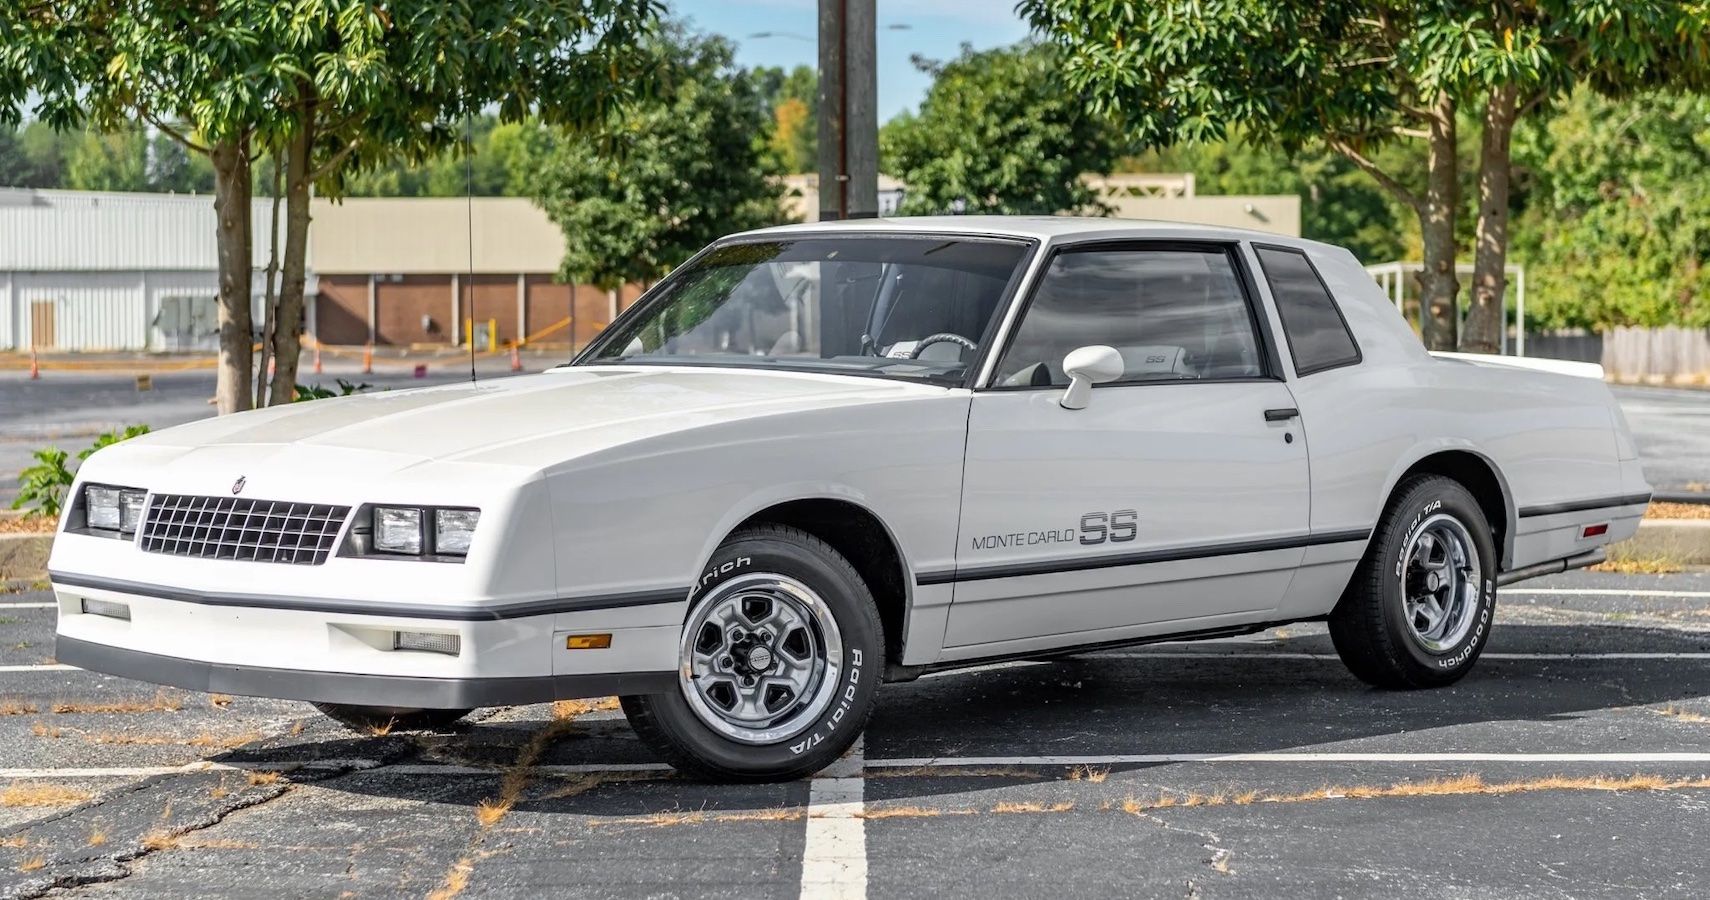 1983_chevrolet_monte-carlo_1983_chevrolet_monte-carlo_19f5a7cb-f783-4652-a132-8d0c65e5bcc5-aw2jAl-52382-52383-scaled 3